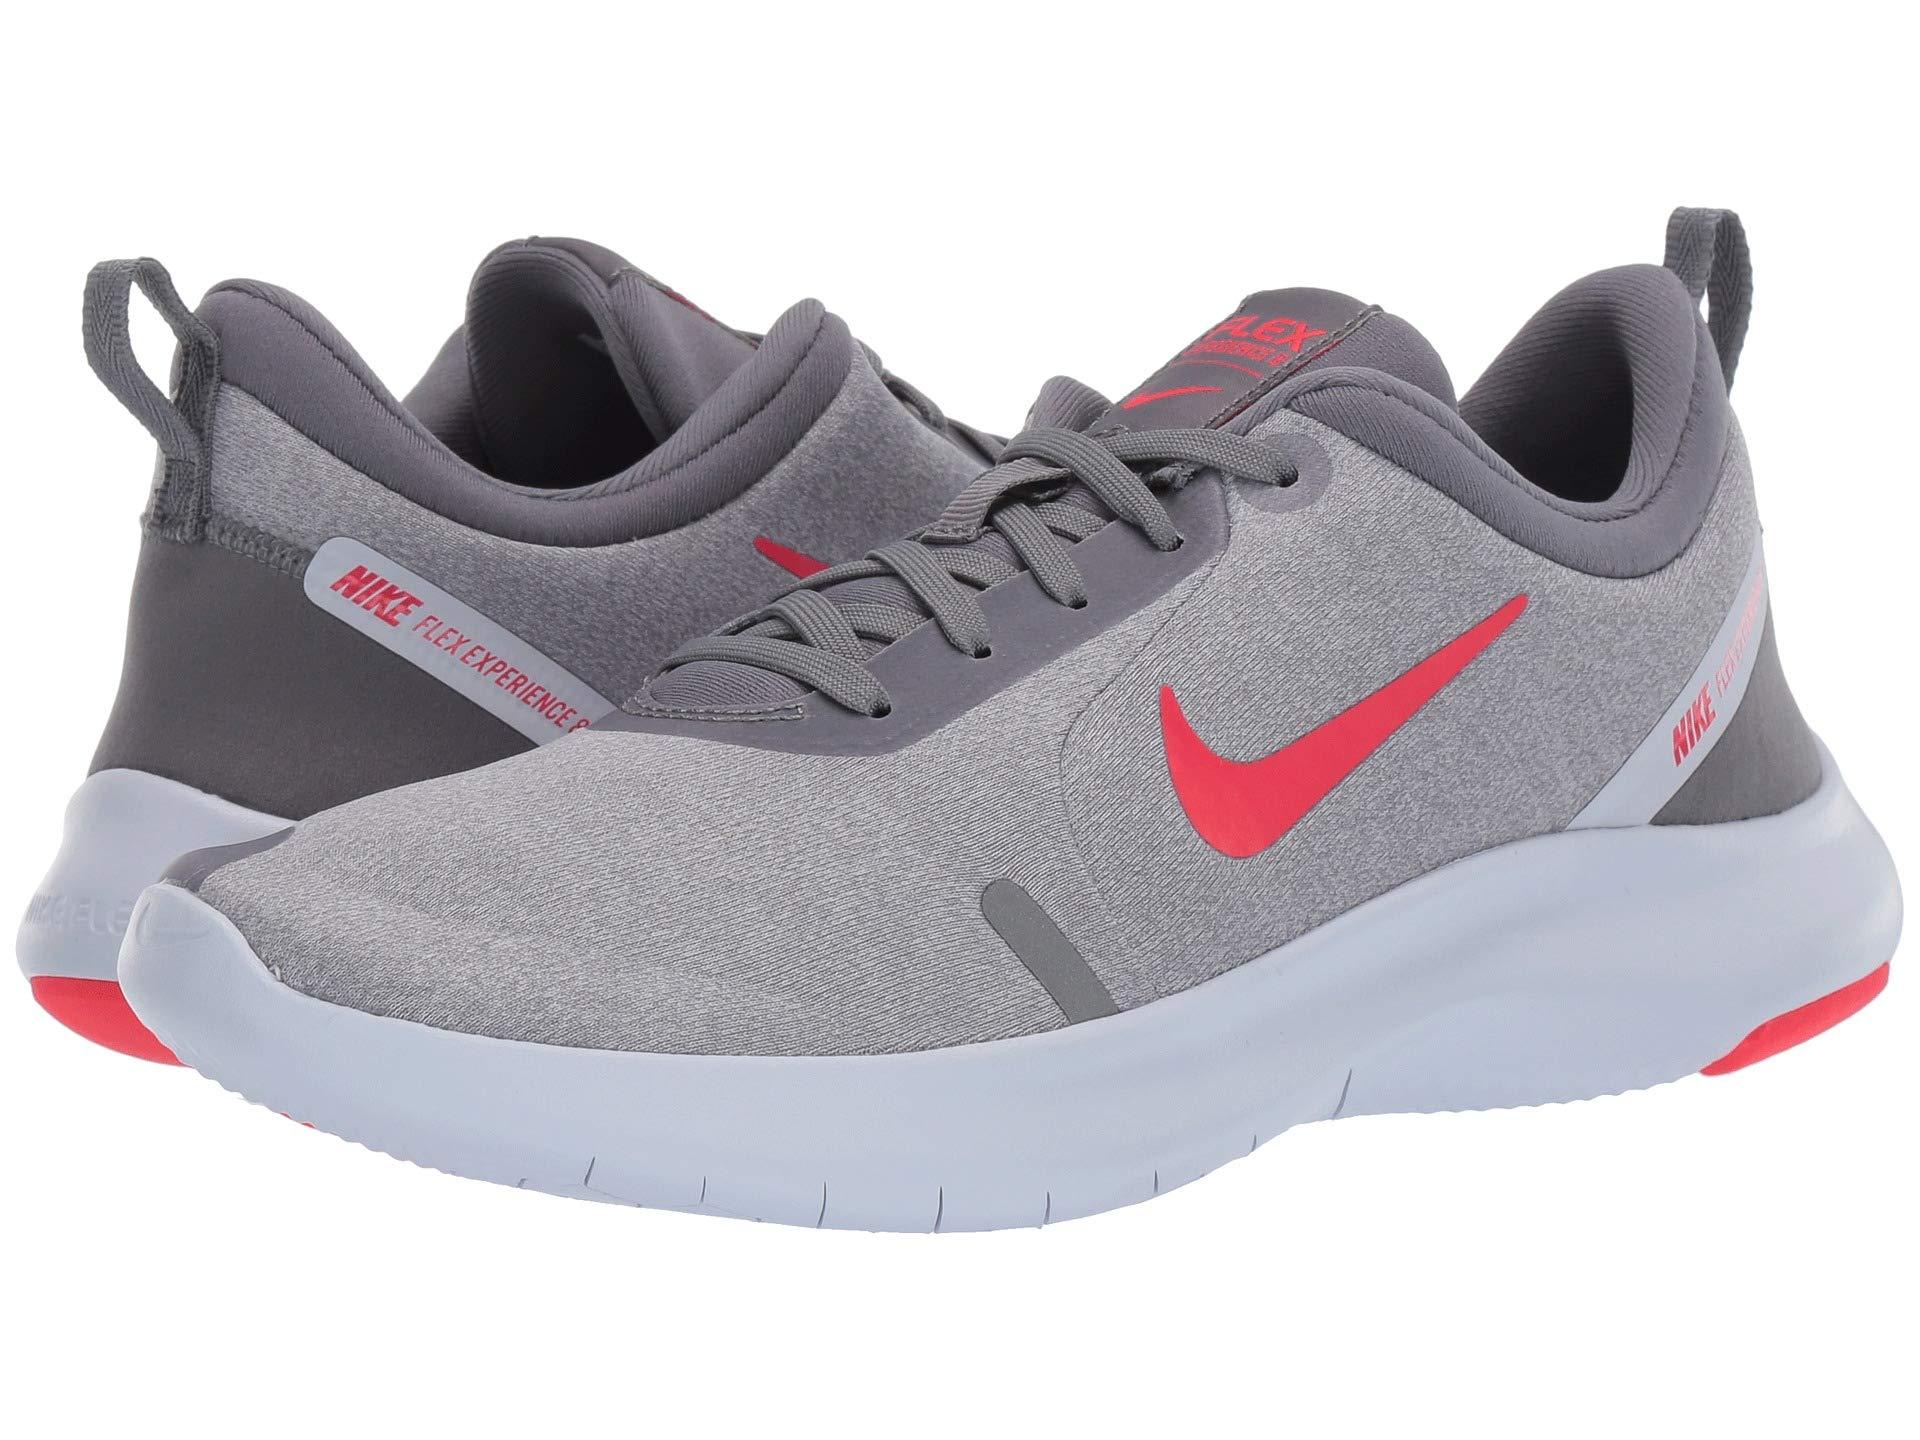 Nike Synthetic Flex Experience Rn 8 Running Shoe In Platinum Pink Gray